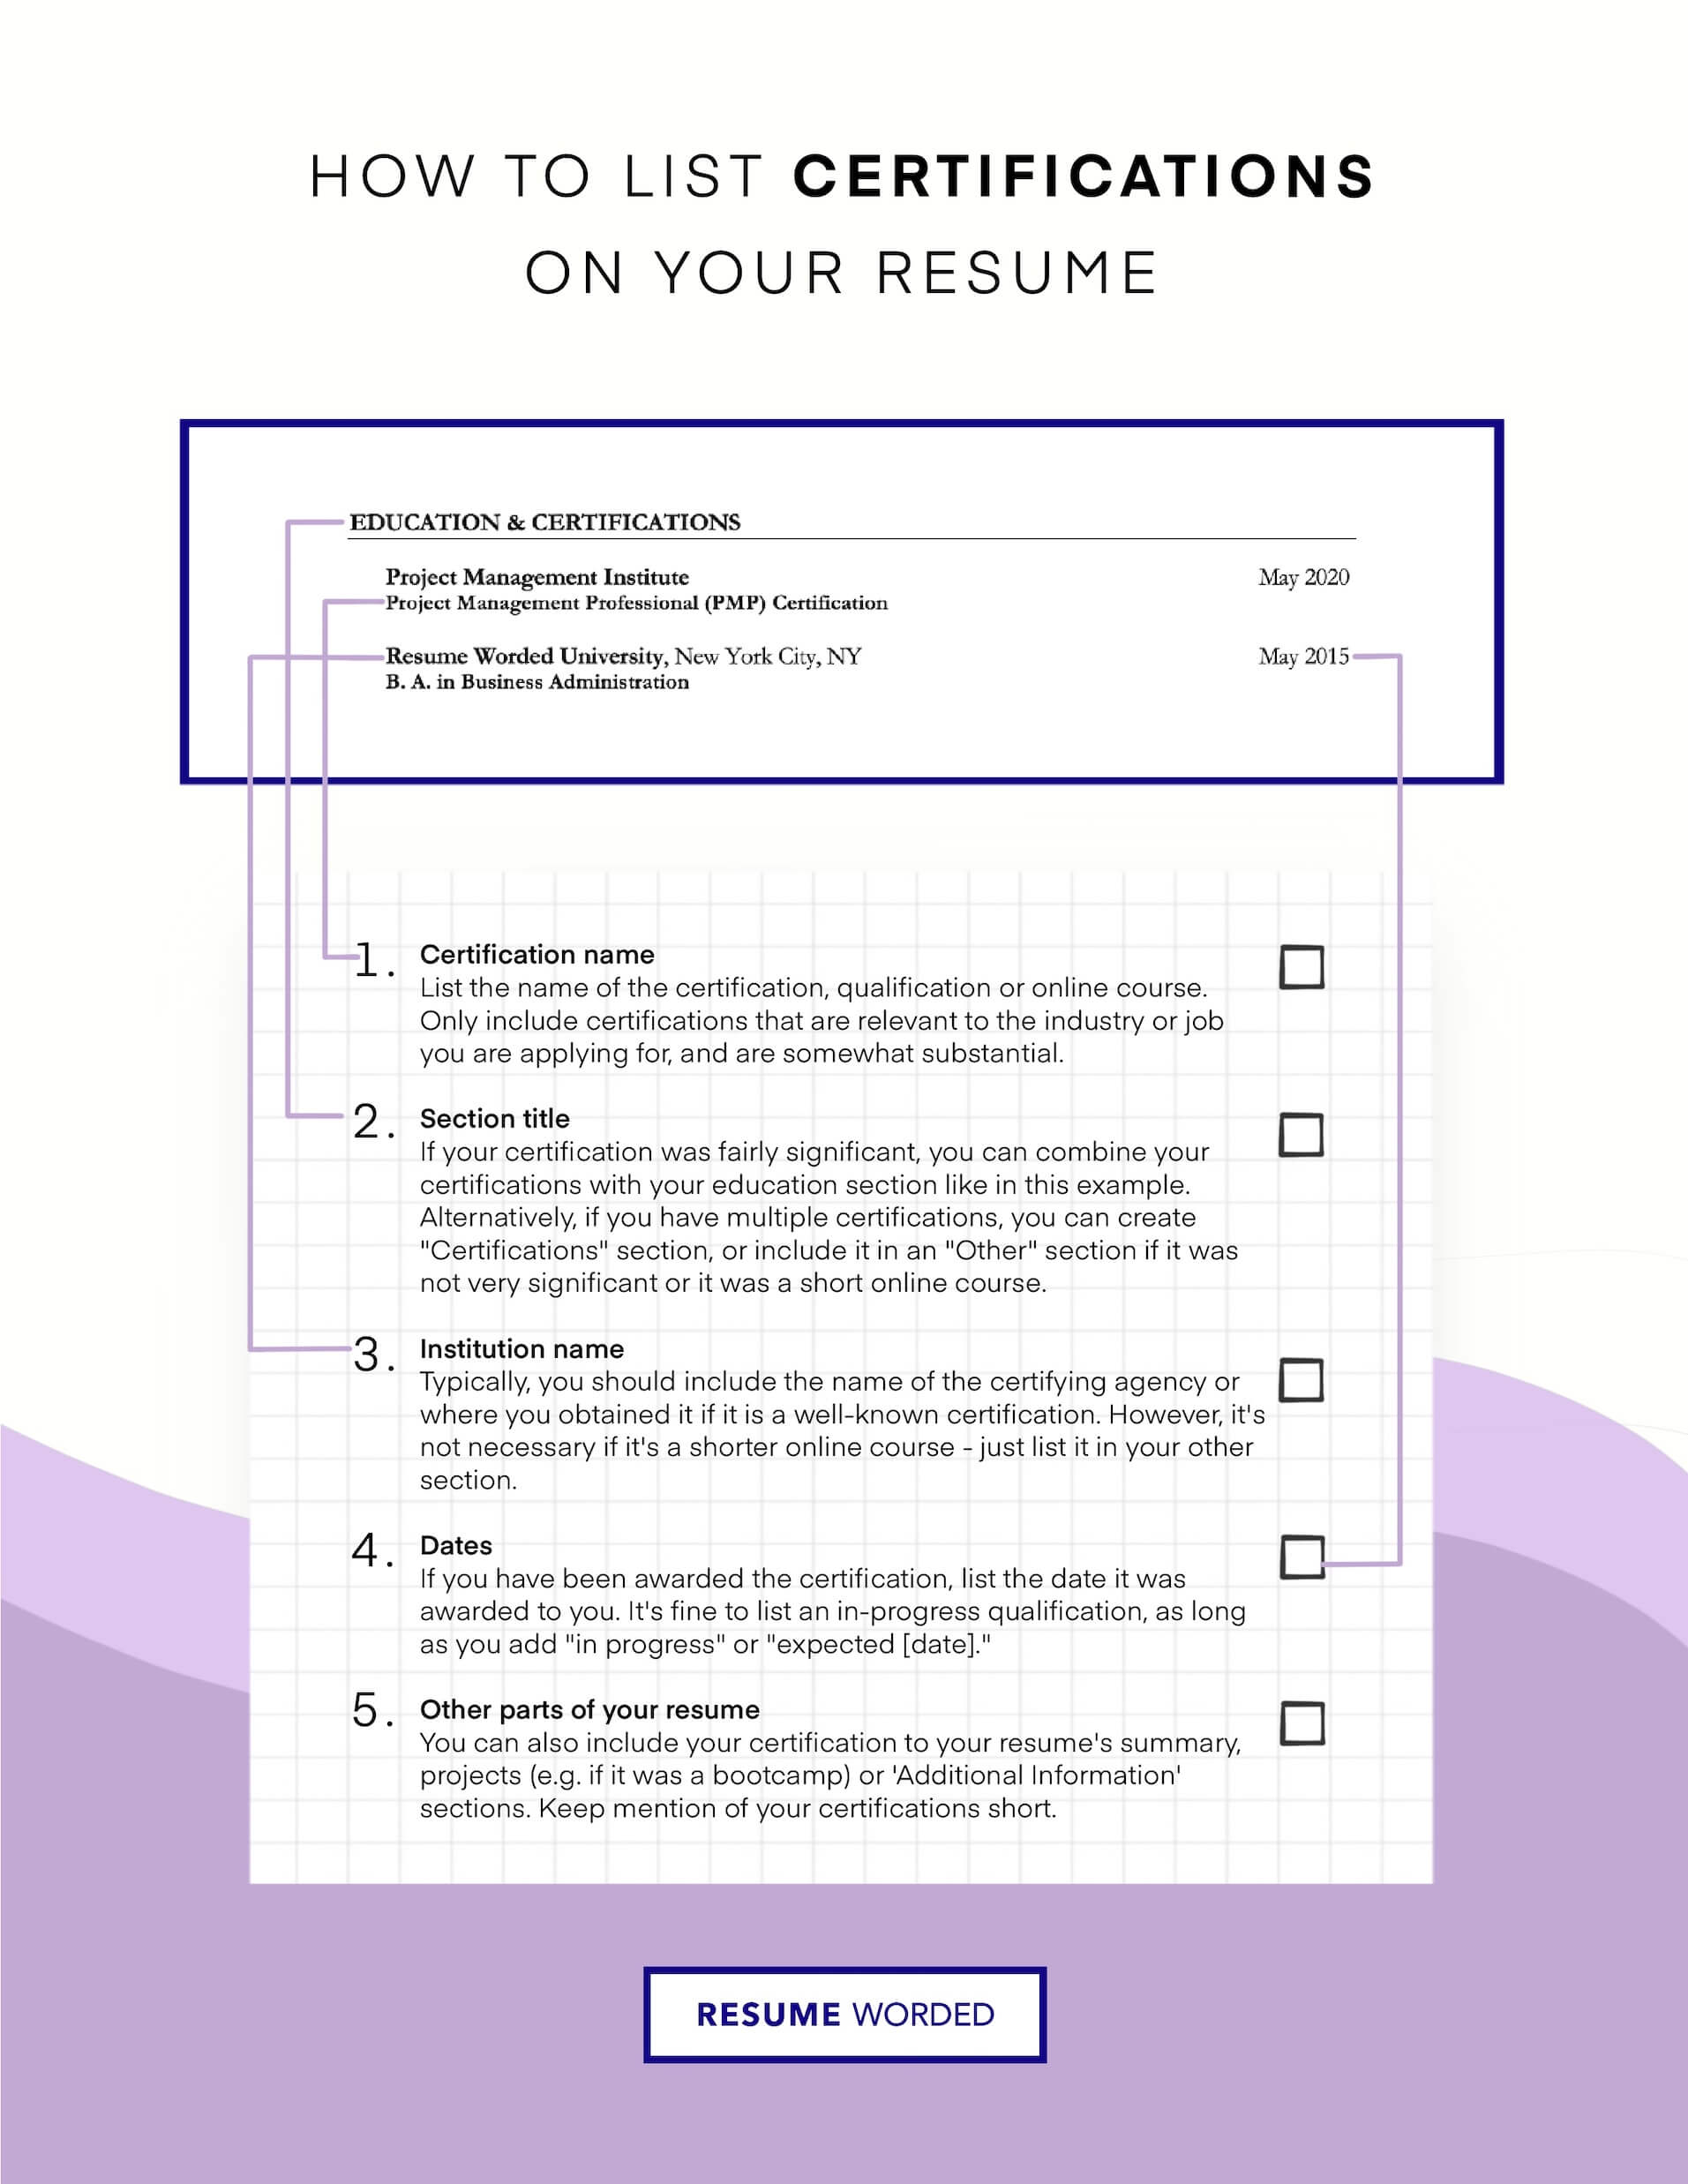 Highlight any certification in the organization’s sector. - Non-Profit Employee Resume